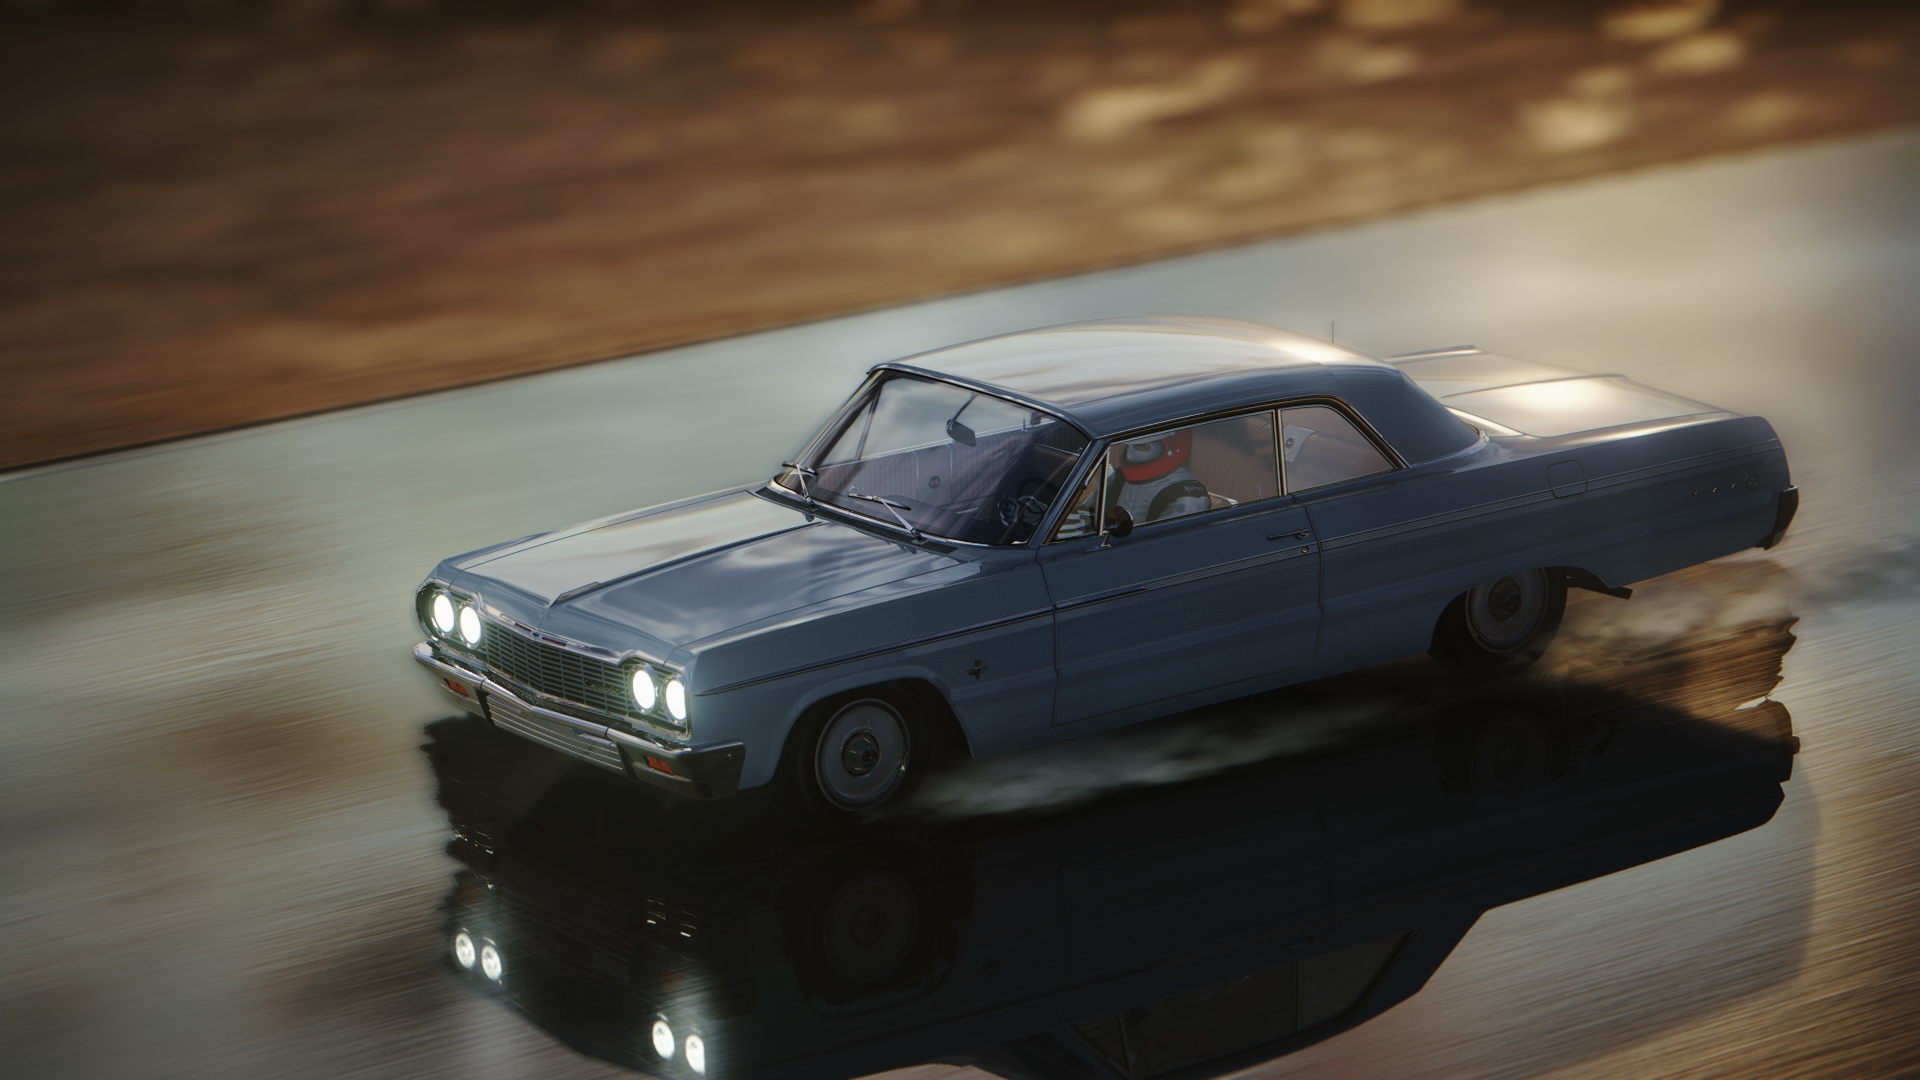 Assetto Corsa Chevrolet Impala Willow Springs by Wildart89